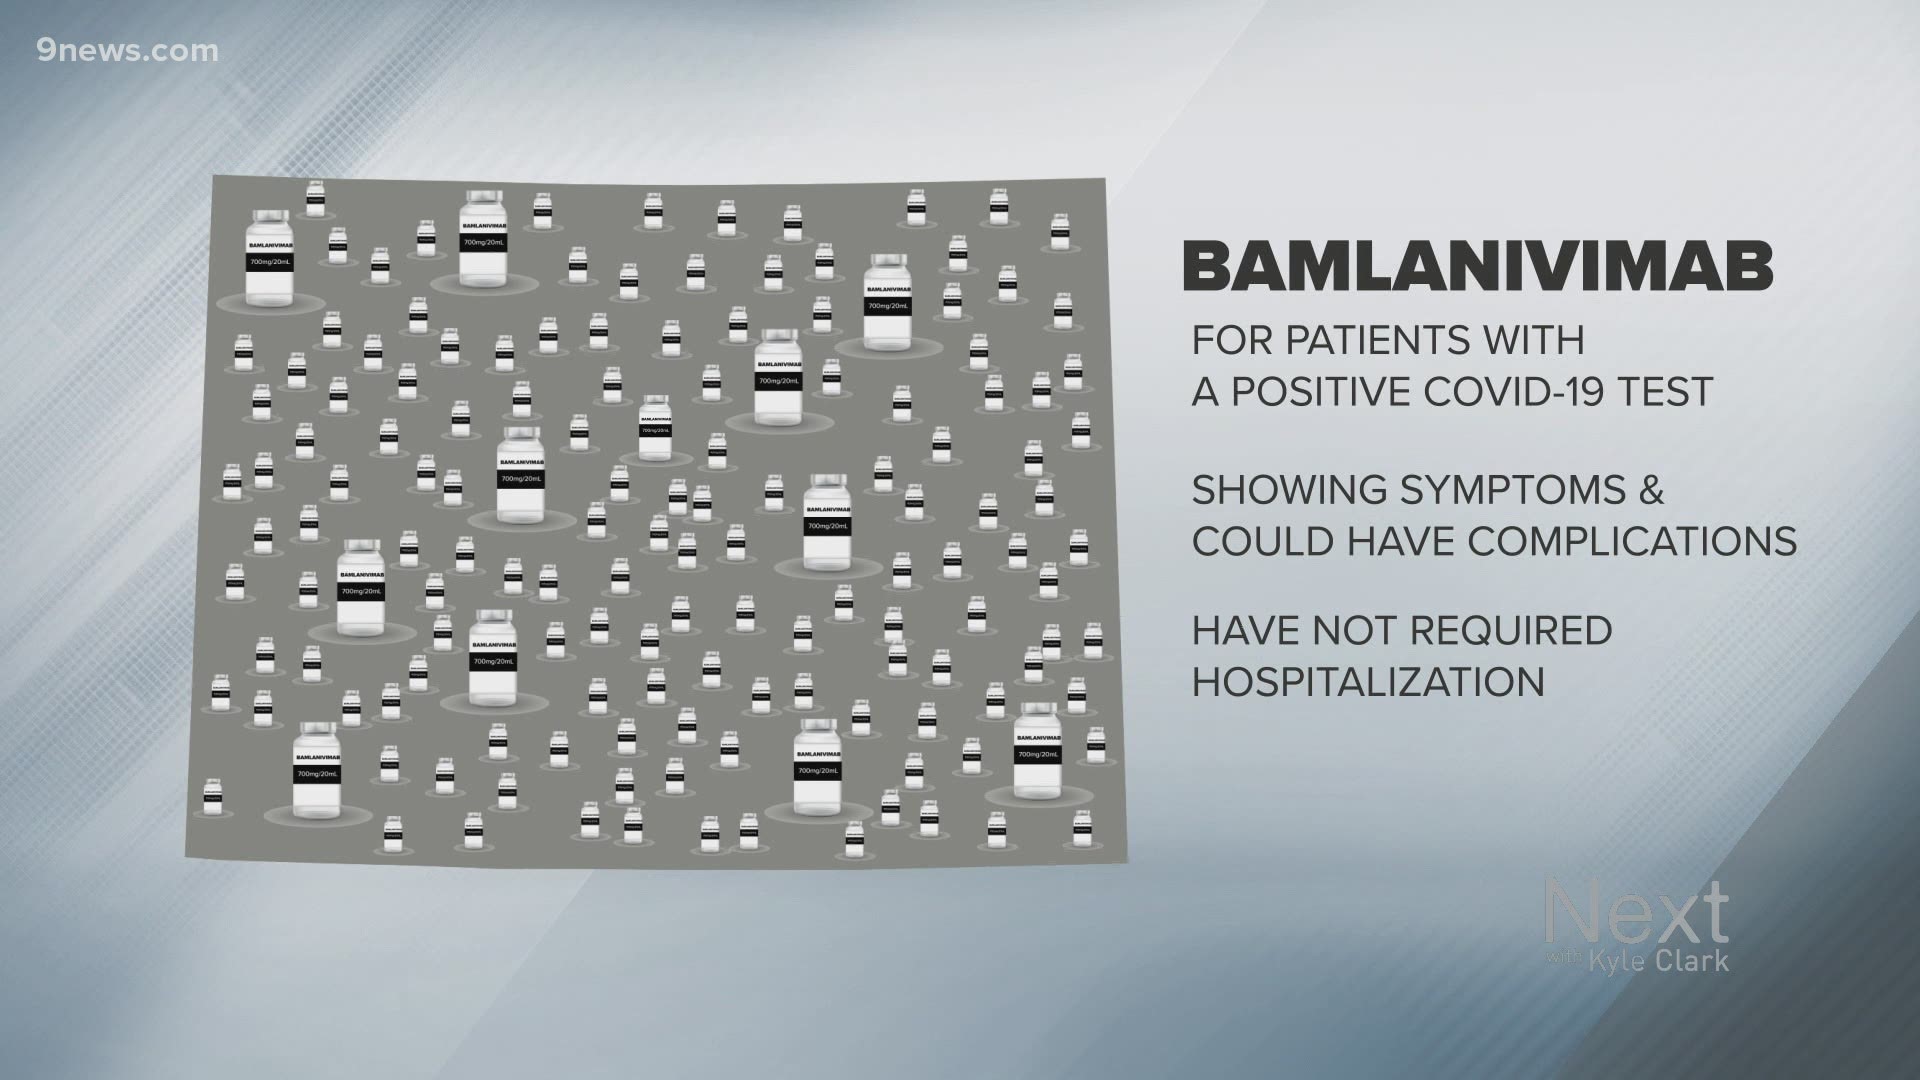 The state has received 3,000 doses of Bamlanivimab, a monoclonal antibody therapy. The process can be complicated but the hope is it cuts down on hospitalizations.